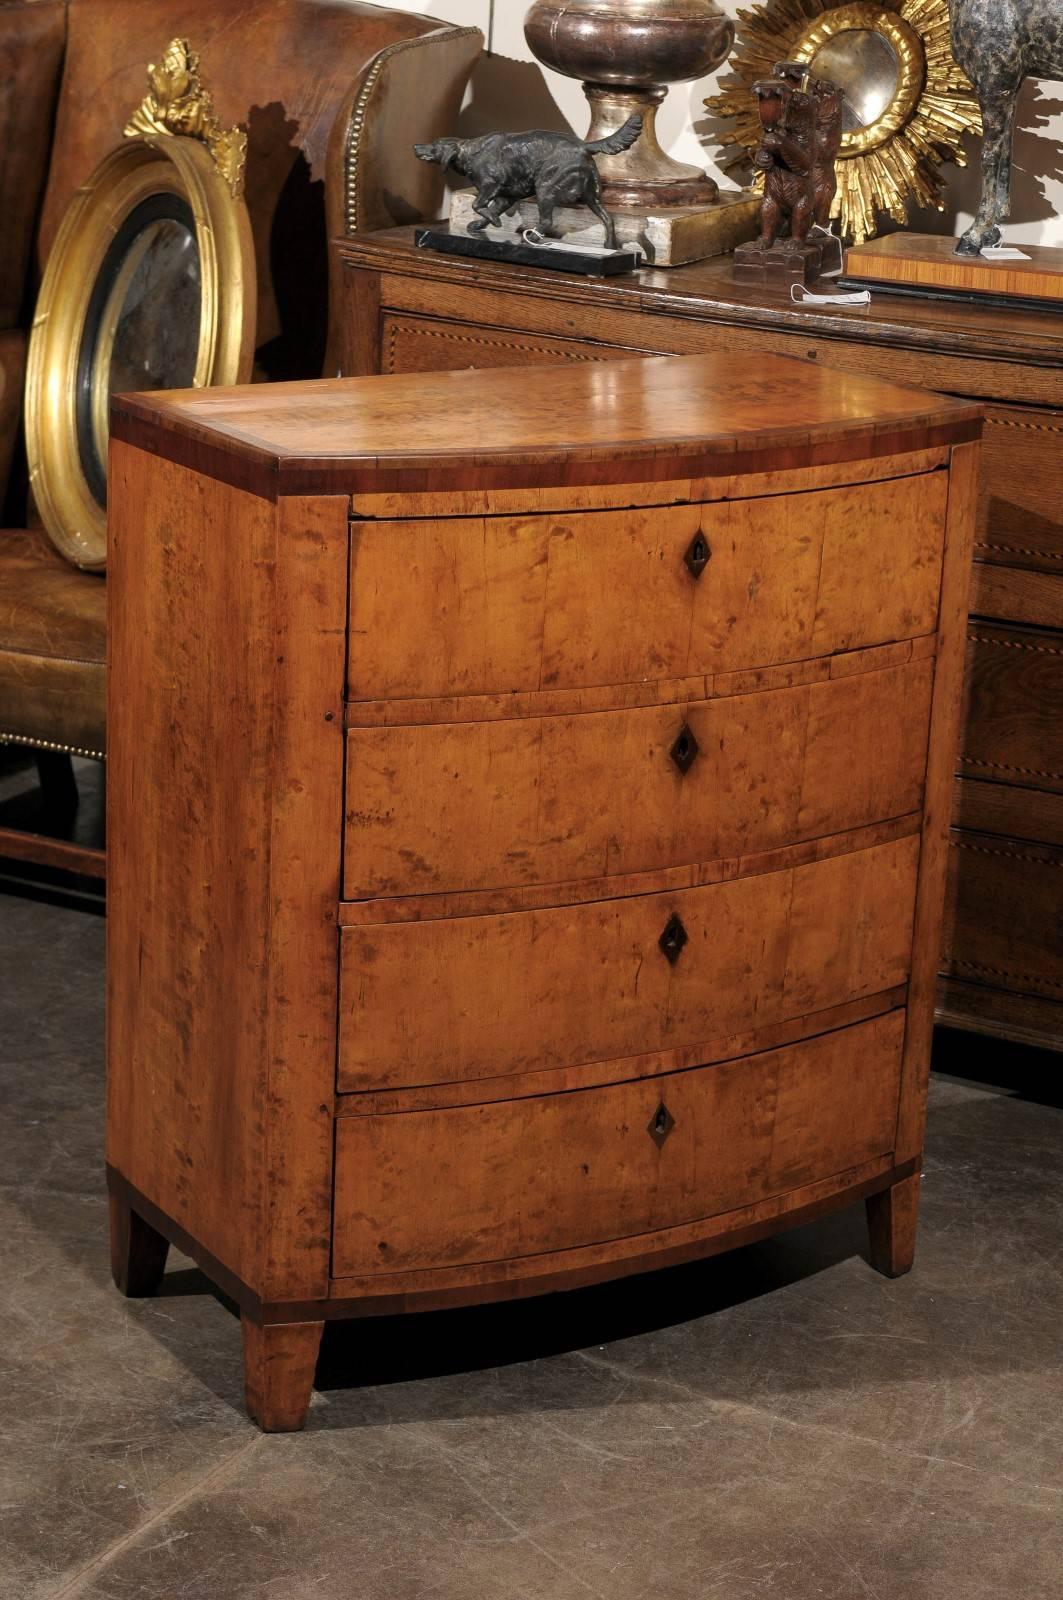 A mid 19th century birch Biedermeier bowfront chest of four drawers featuring a rectangular top with a banded inlay of darker wood on three sides running on both the rectangular top and the upper part of the top rail. Separated by crossbars, each